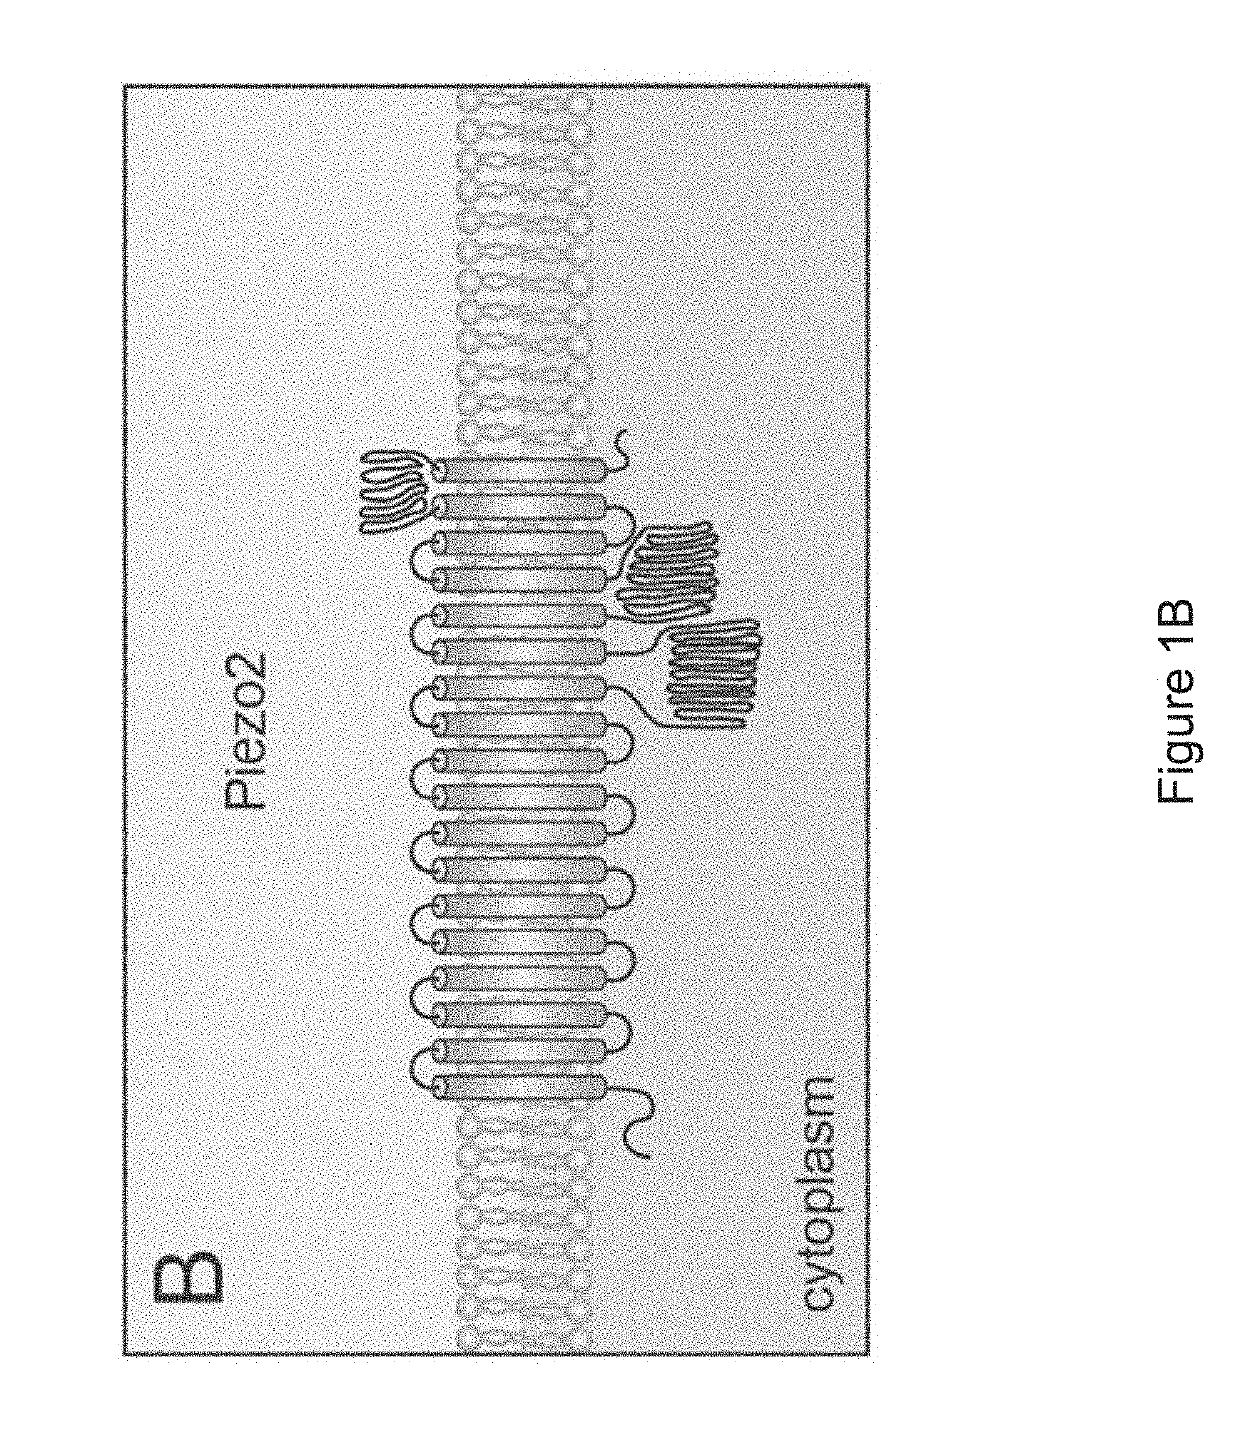 Devices and methods for treatment of anxiety and related disorders via delivery of mechanical stimulation to nerve, mechanoreceptor, and cell targets